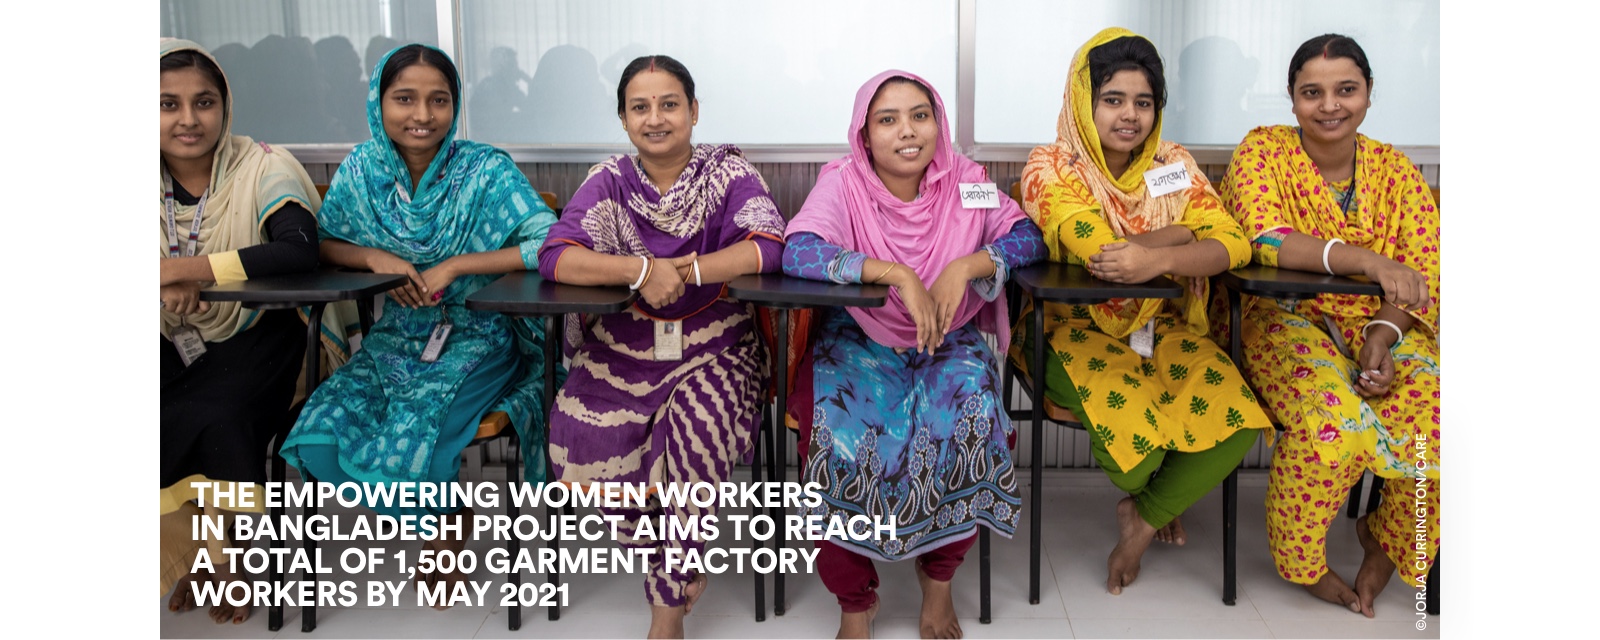 The Empowering Women Workers in Bangladesh aims to reach a total of 1,500 garment factory workers by May 2021.